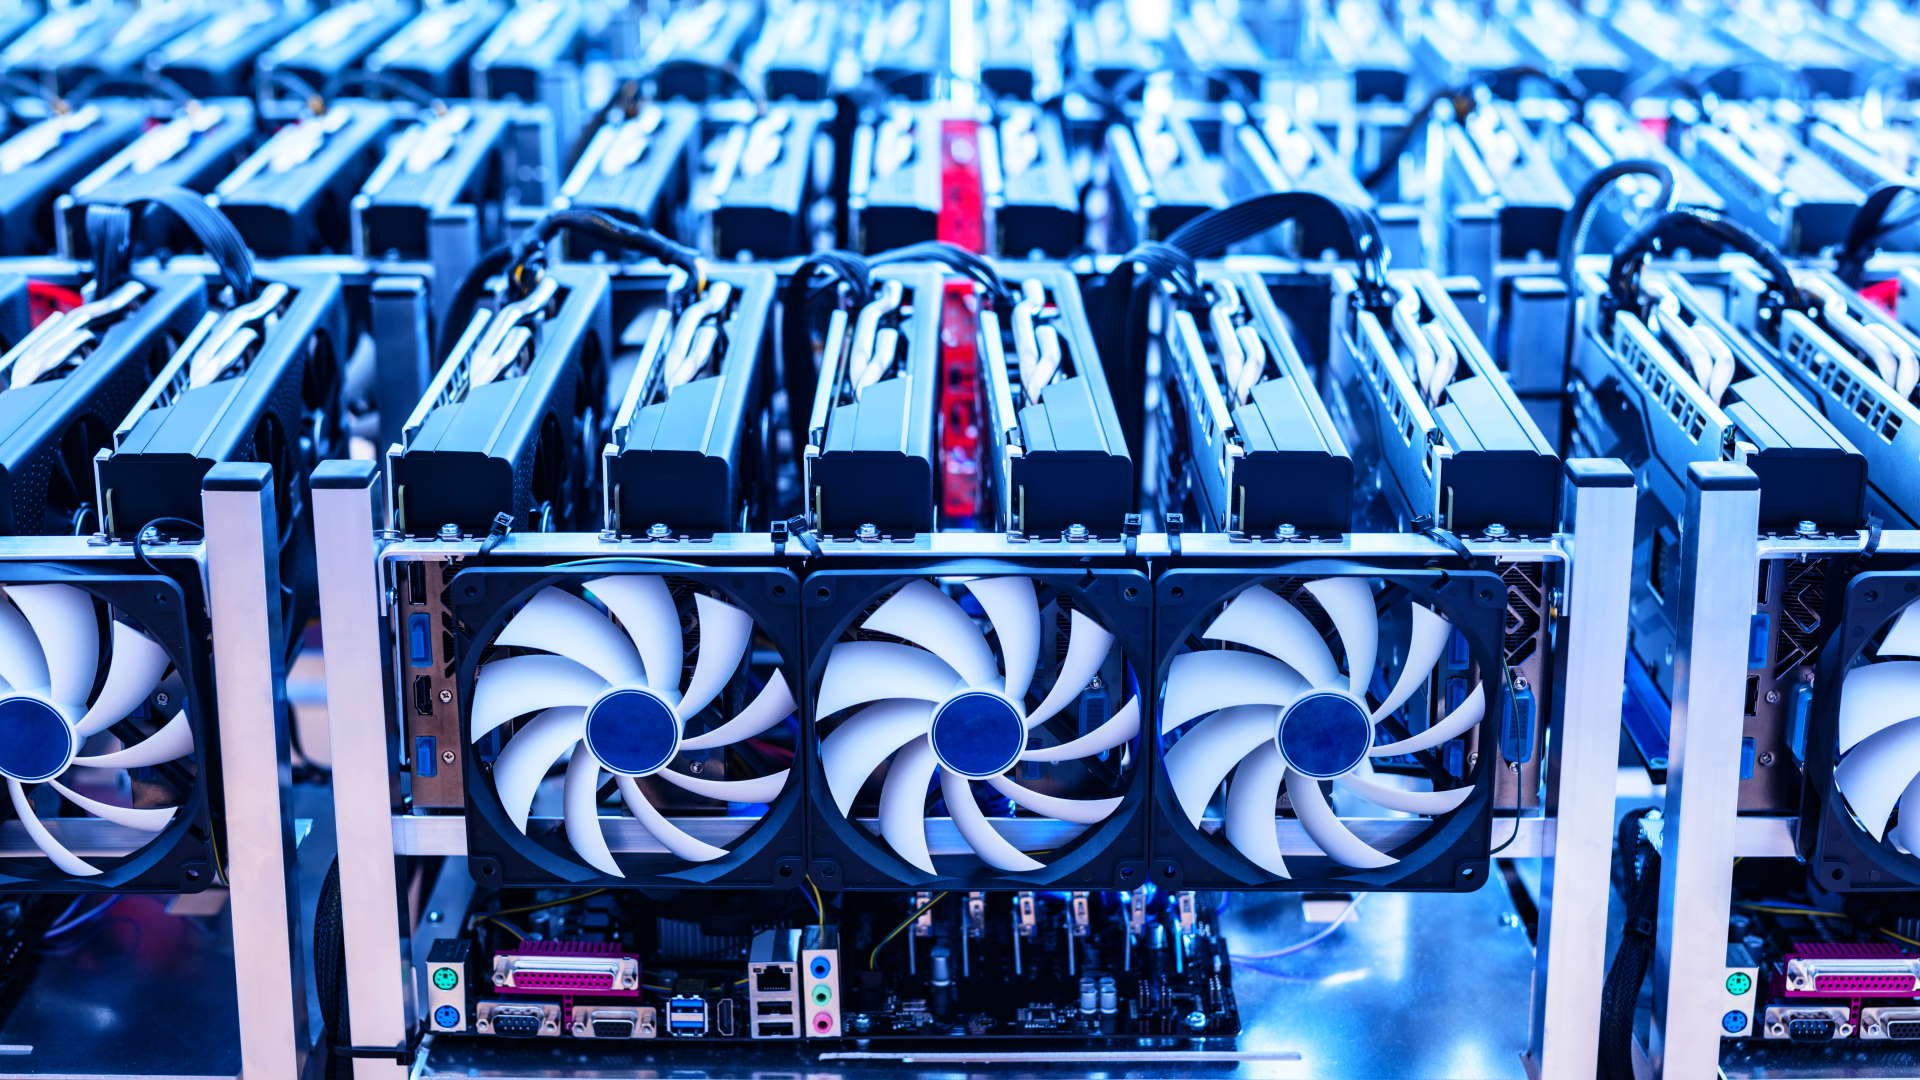 Racks of graphics cards being used for cryptocurrency mining